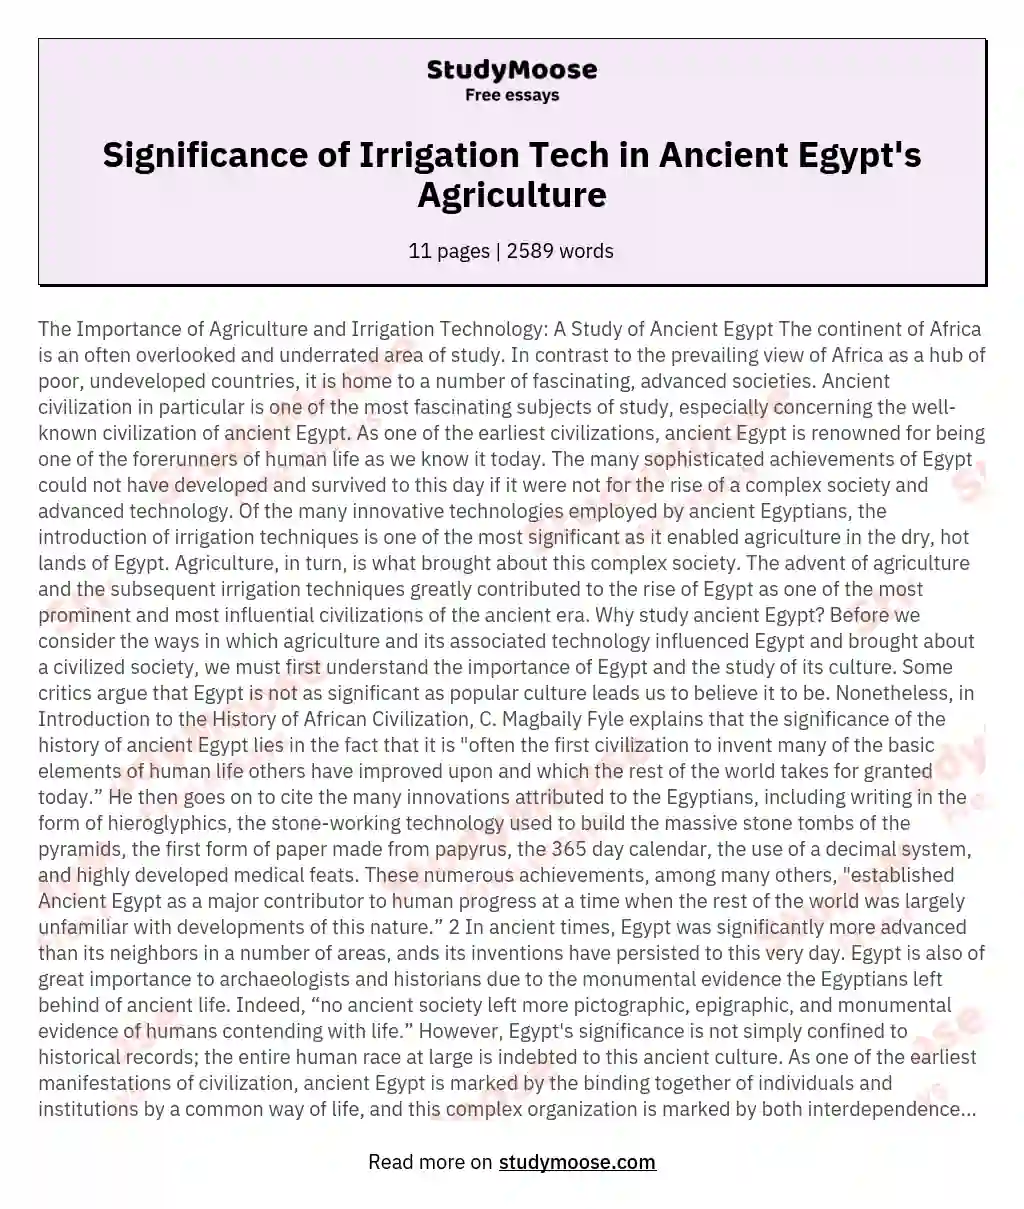 Significance of Irrigation Tech in Ancient Egypt's Agriculture essay